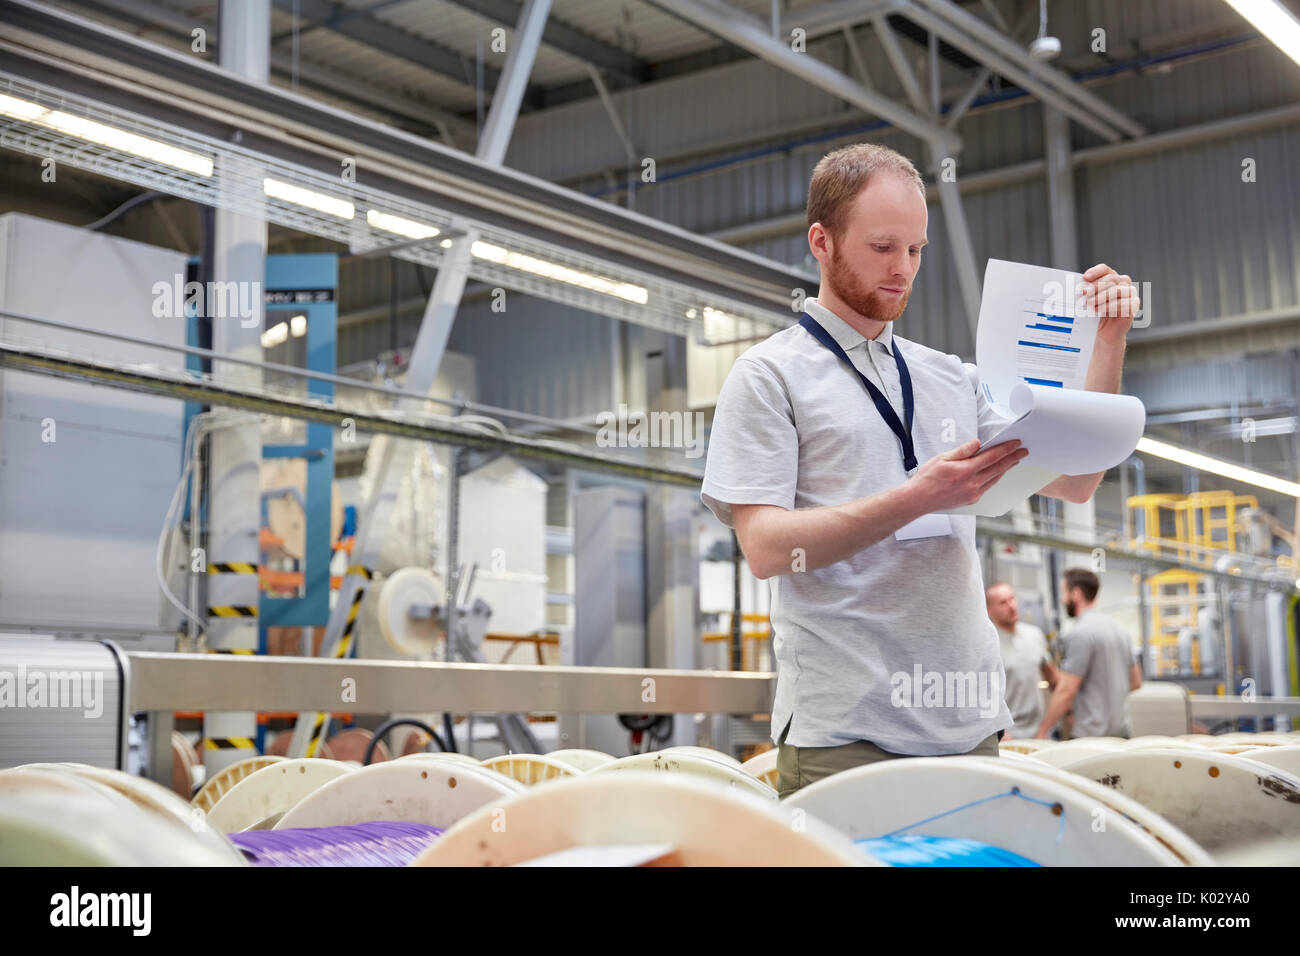 Male supervisor with clipboard checking inventory in fiber optics factory Stock Photo